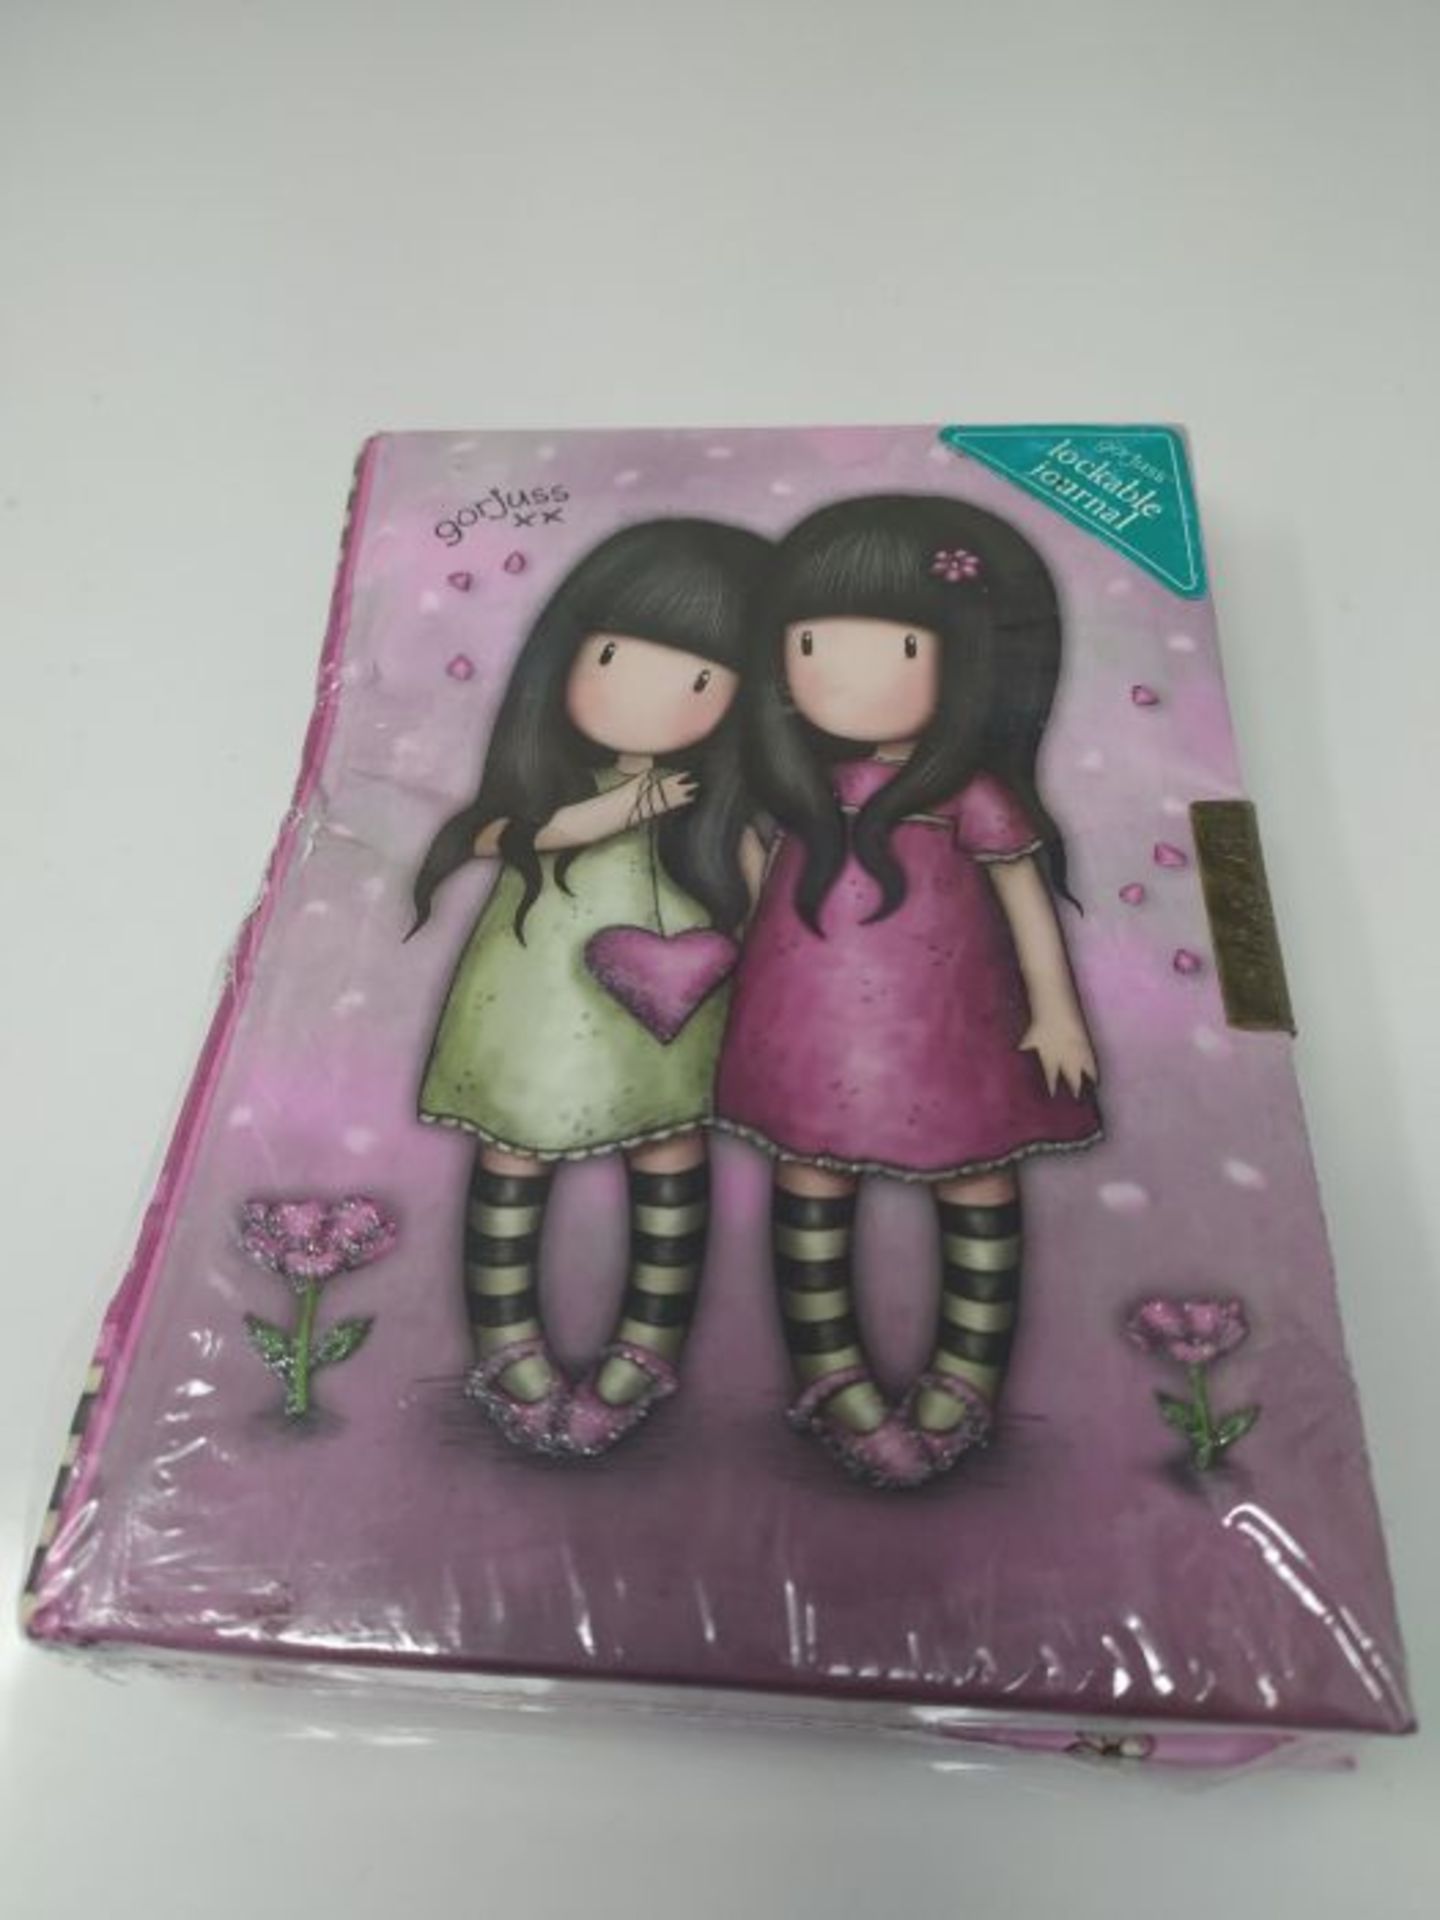 Gorjuss Sparkle & Bloom Lockable Notebook 577GJ18 - You Can Have Mine - Image 2 of 2